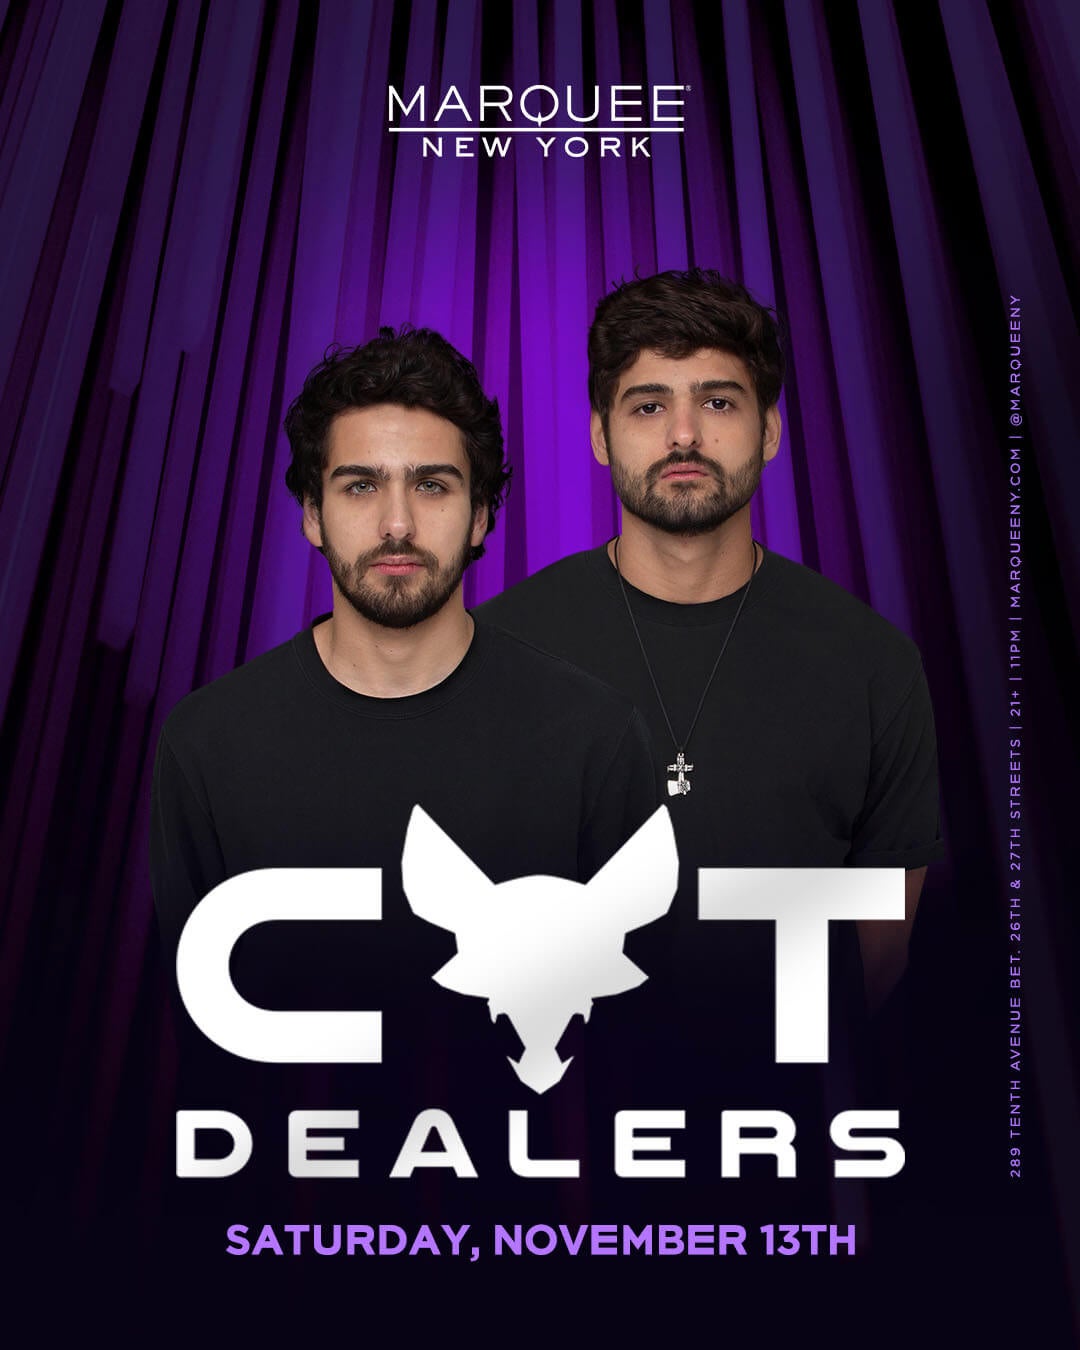 11/13/21 Cat Dealers – Marquee New York